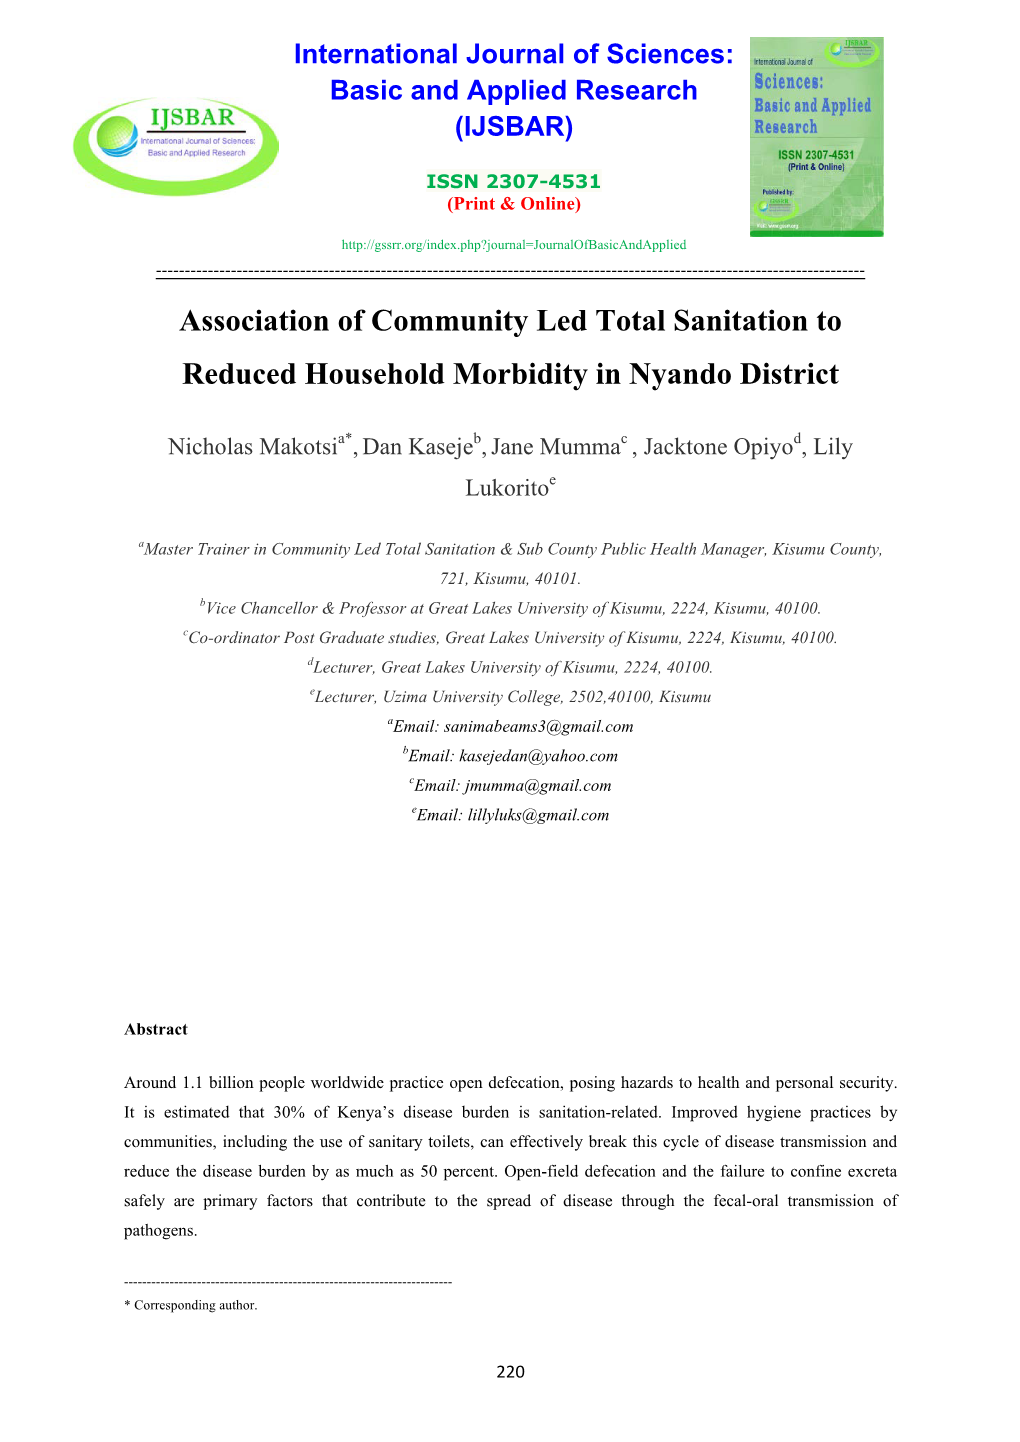 Association of Community Led Total Sanitation to Reduced Household Morbidity in Nyando District